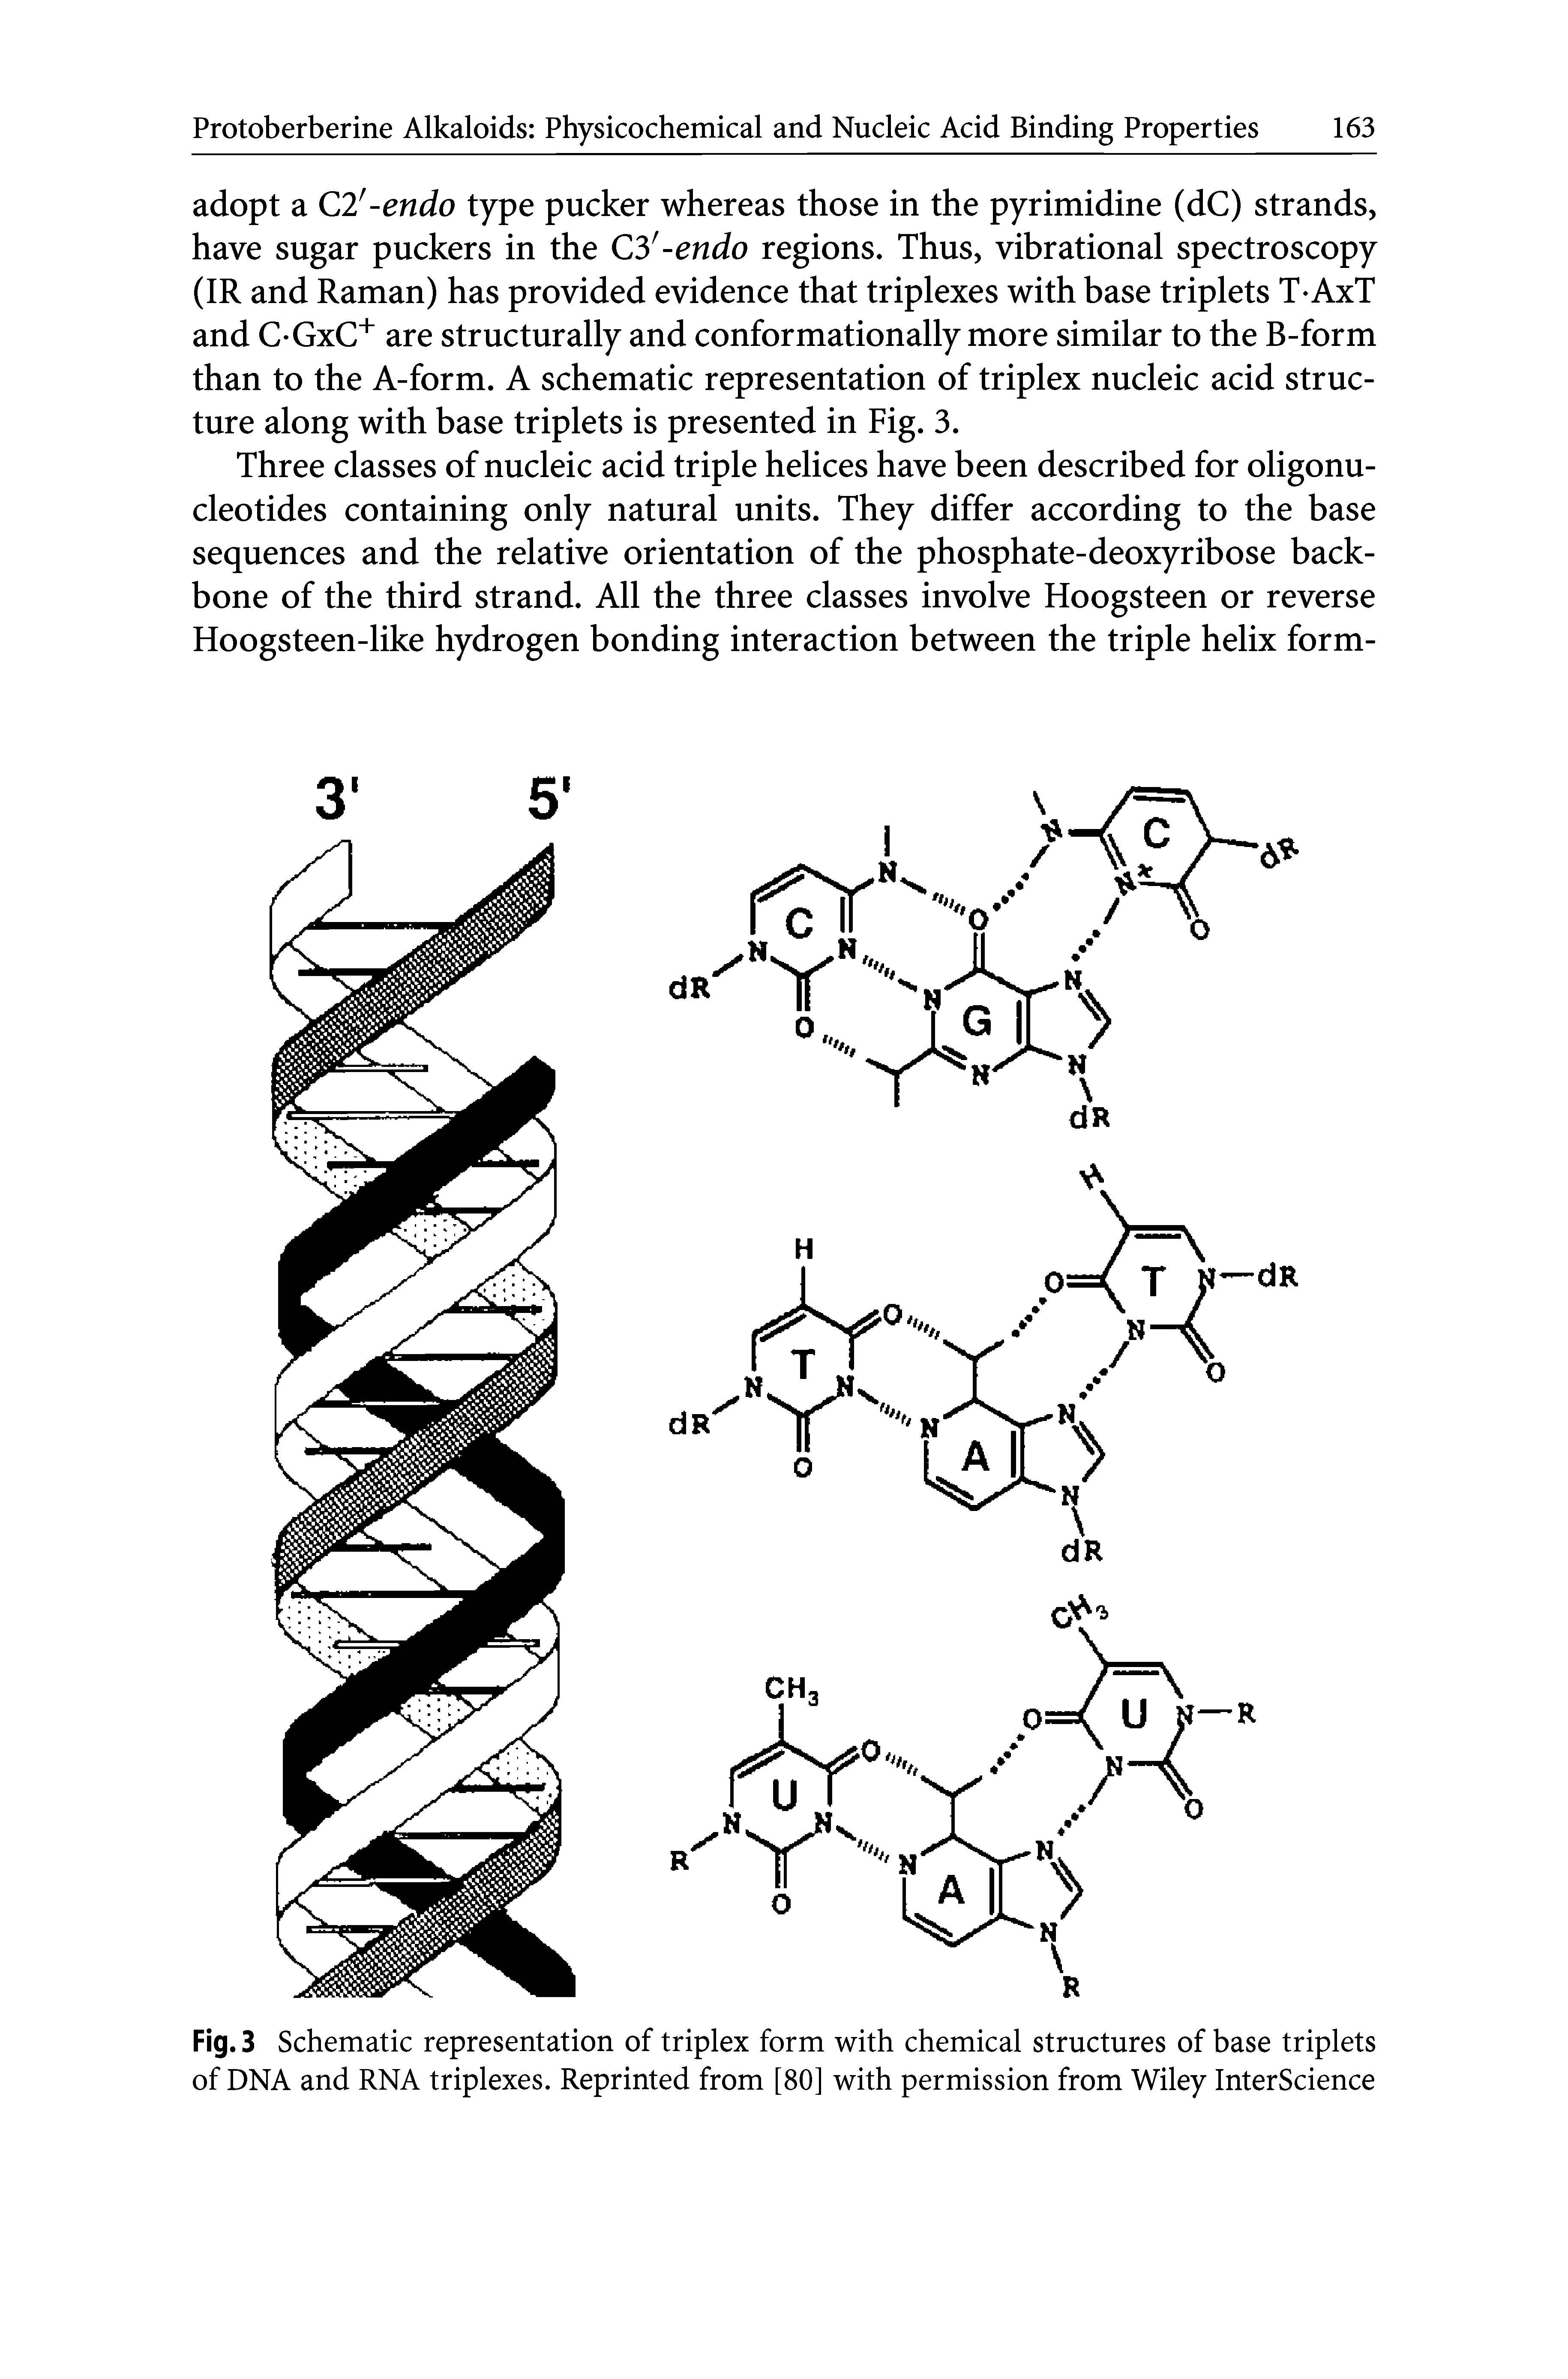 Fig. 3 Schematic representation of triplex form with chemical structures of base triplets of DNA and RNA triplexes. Reprinted from [80] with permission from Wiley InterScience...